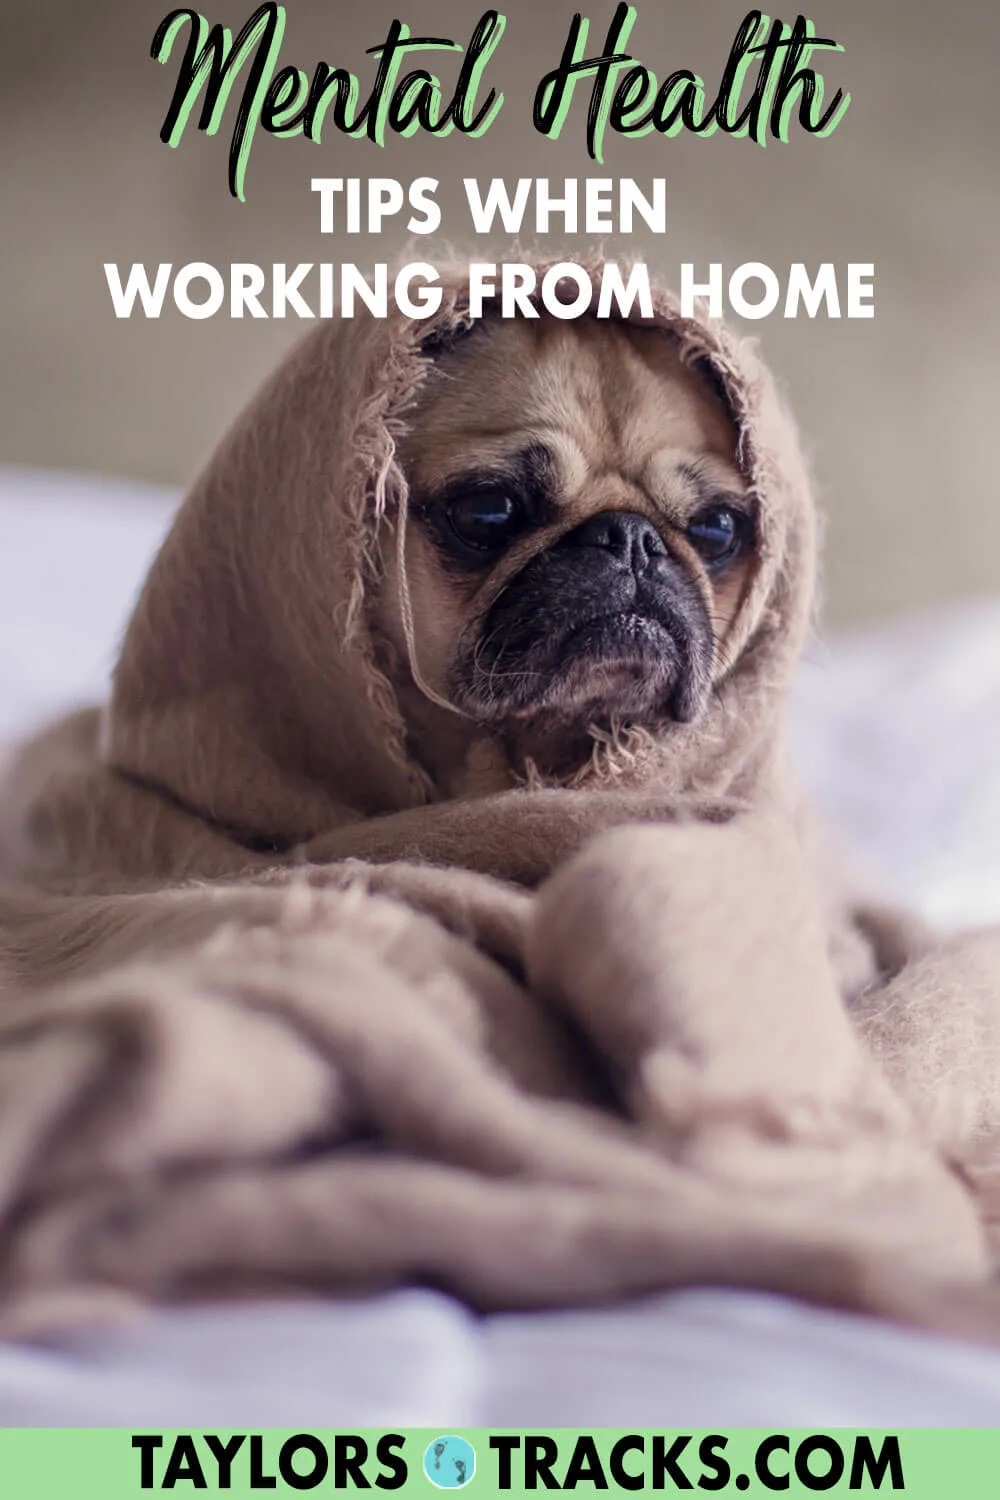 Get working from home tips that are actually useful but also super simple to help you keep your sanity while also being productive. These top work from home tips focus on your mental health just as much as they do your efficiency. Click to find out what they are!